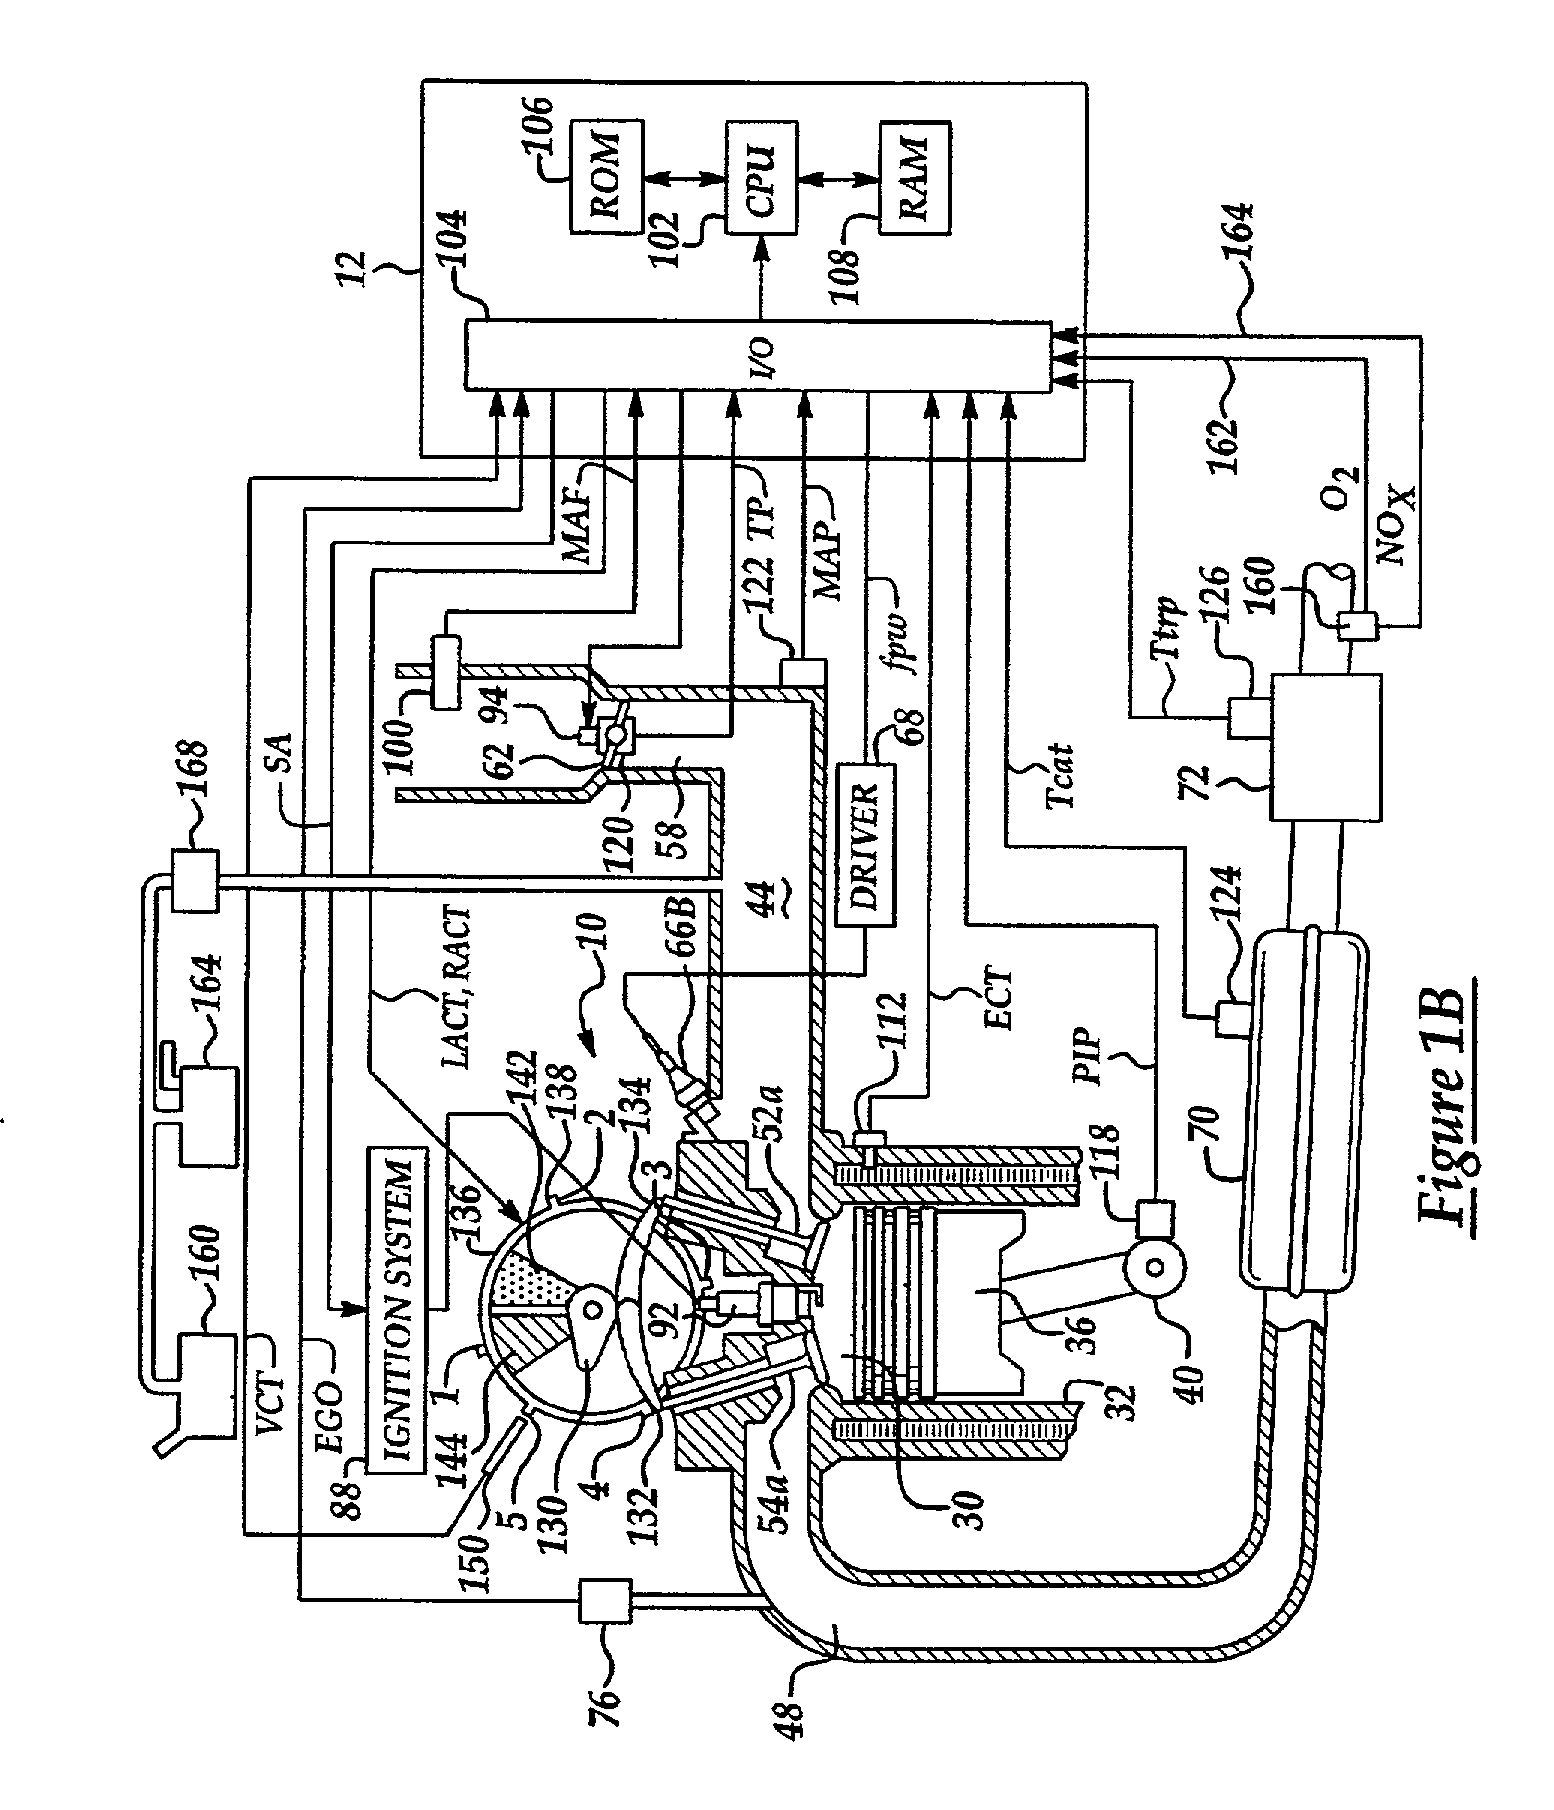 Method to improve fuel economy in lean burn engines with variable-displacement-like characteristics